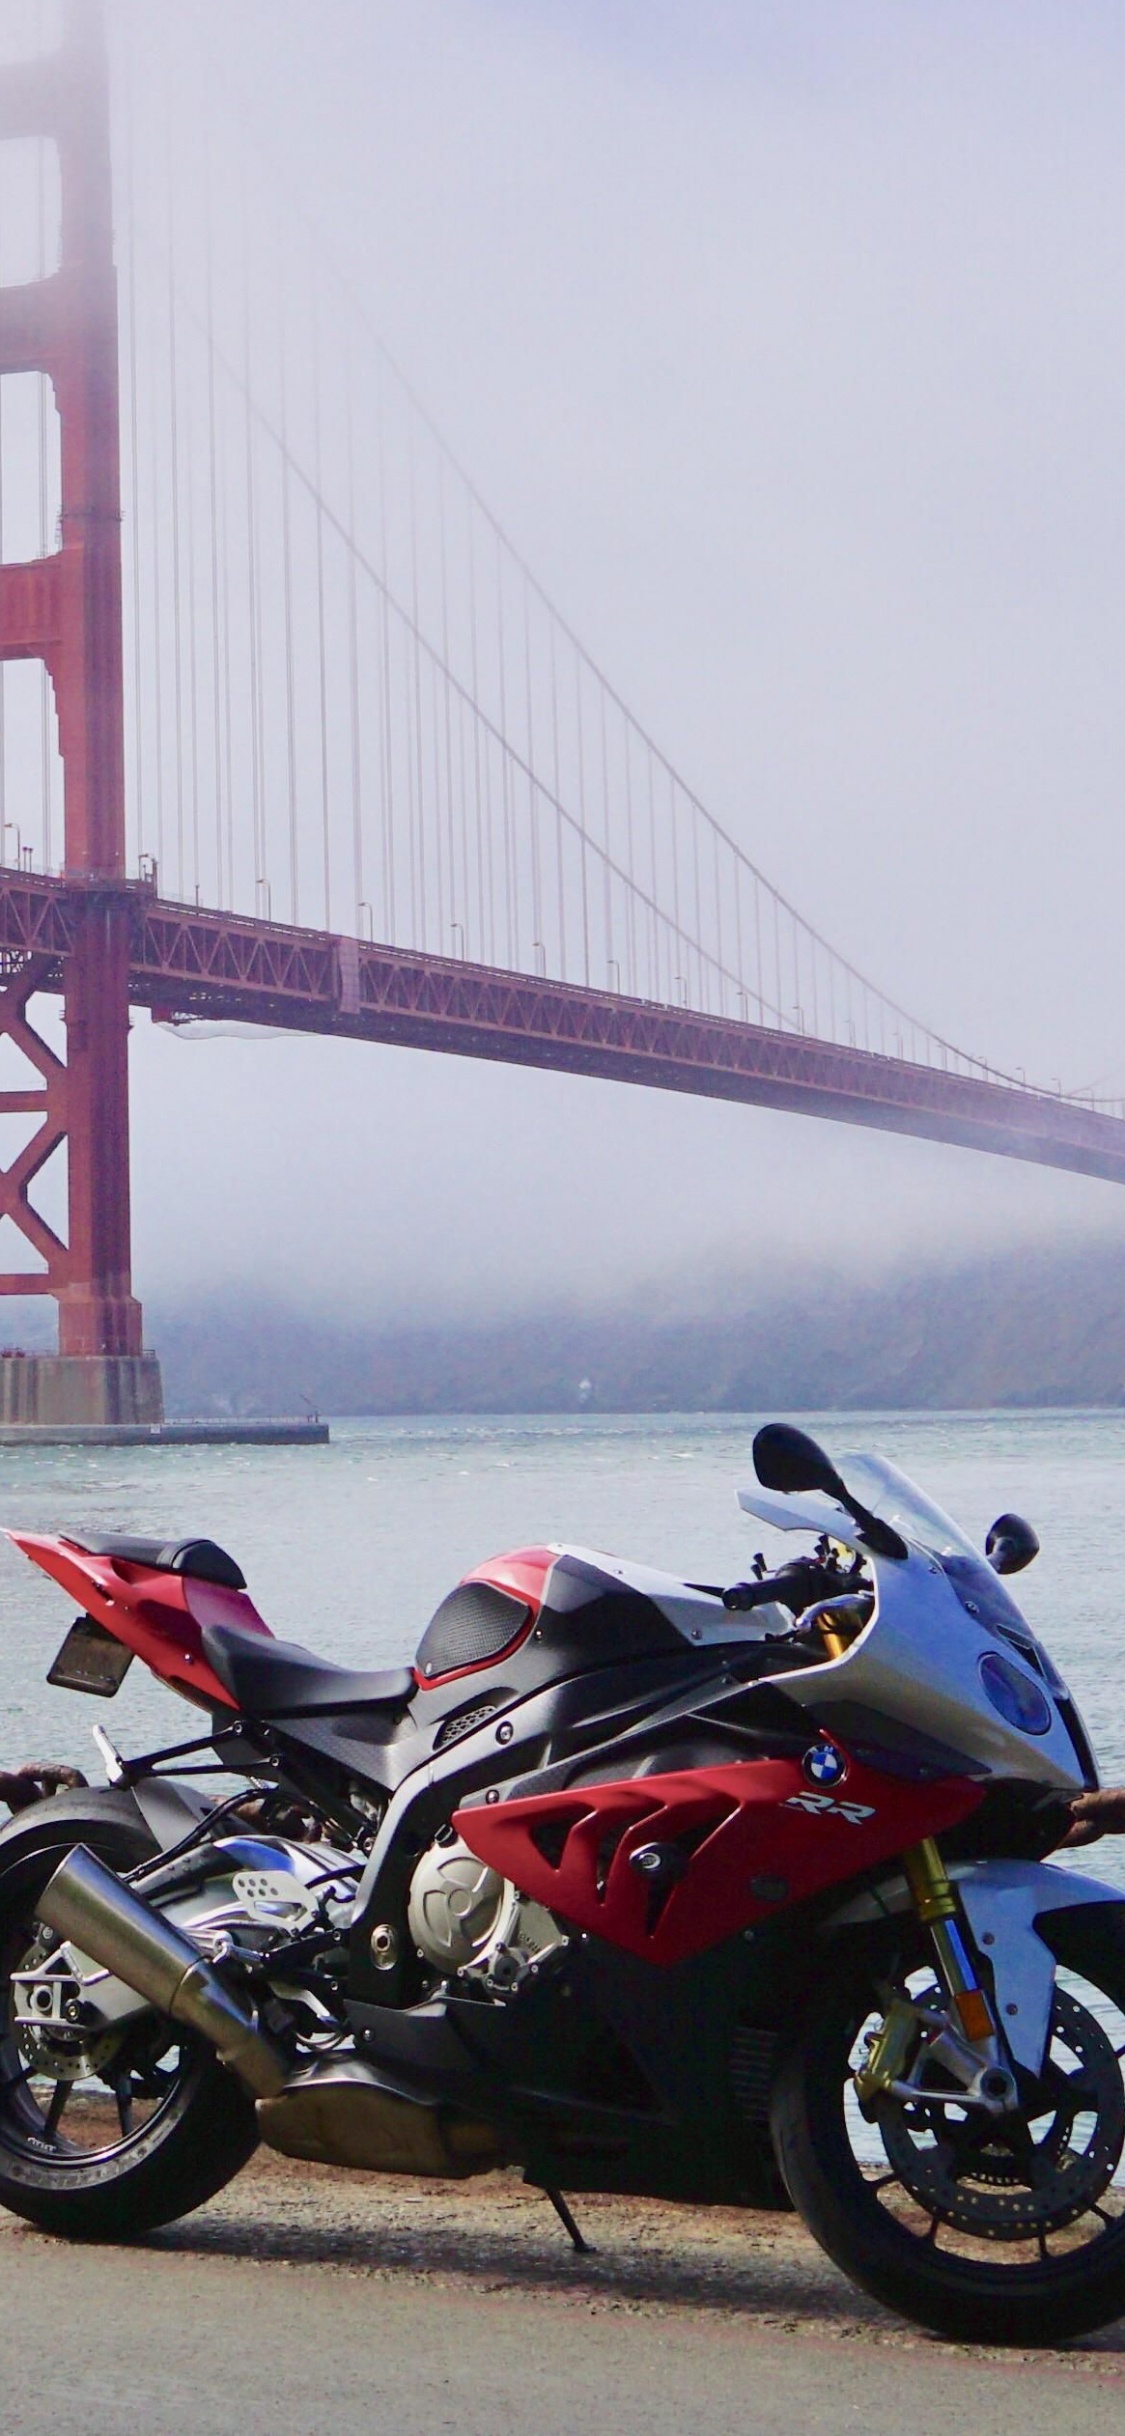 Red and Black Motorcycle Near Golden Gate Bridge. Wallpaper in 1125x2436 Resolution